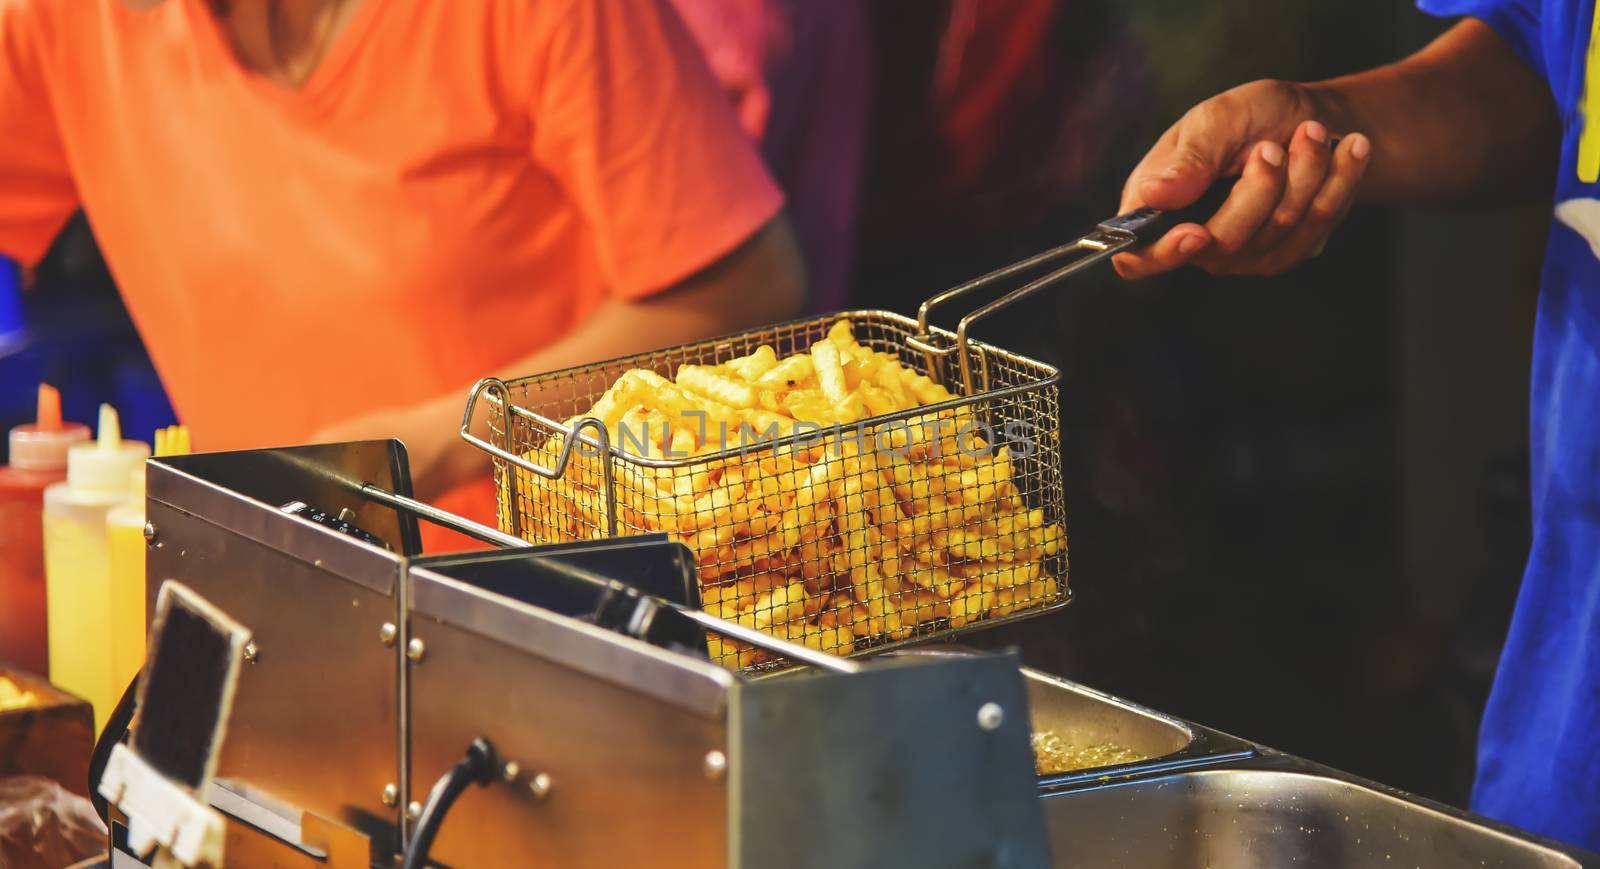 Employees frying french fries with hot oil. Selling food on the street.